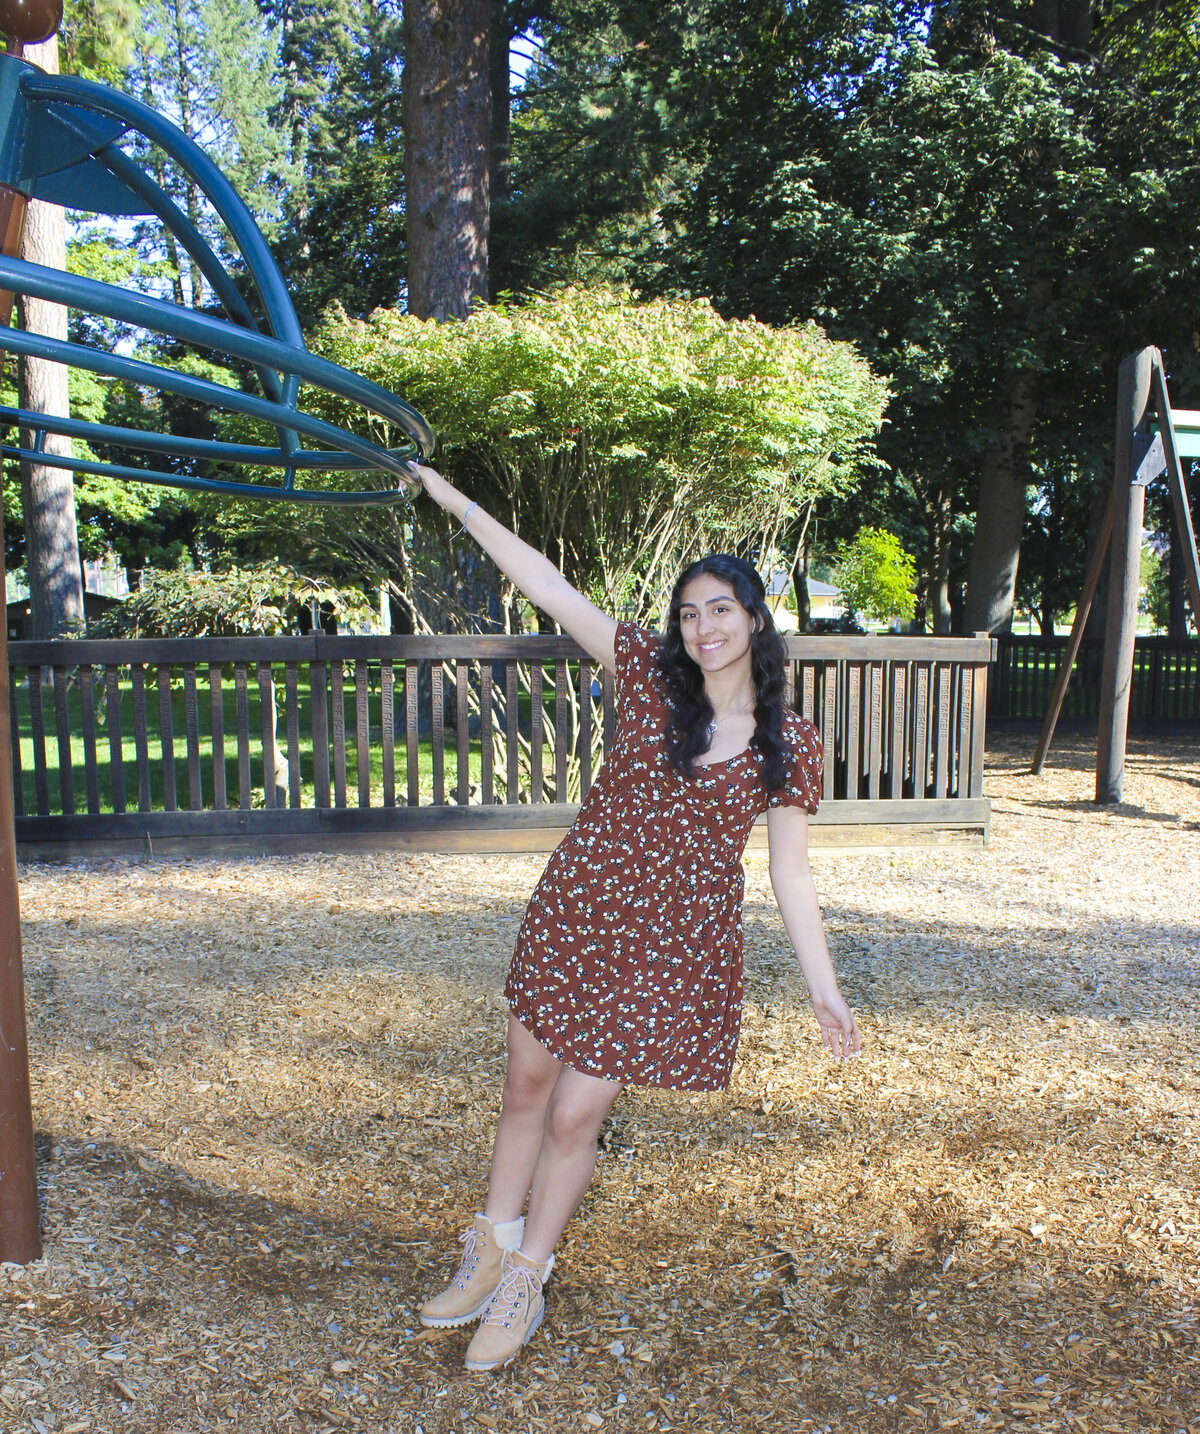 Young lady posing with park playground structure